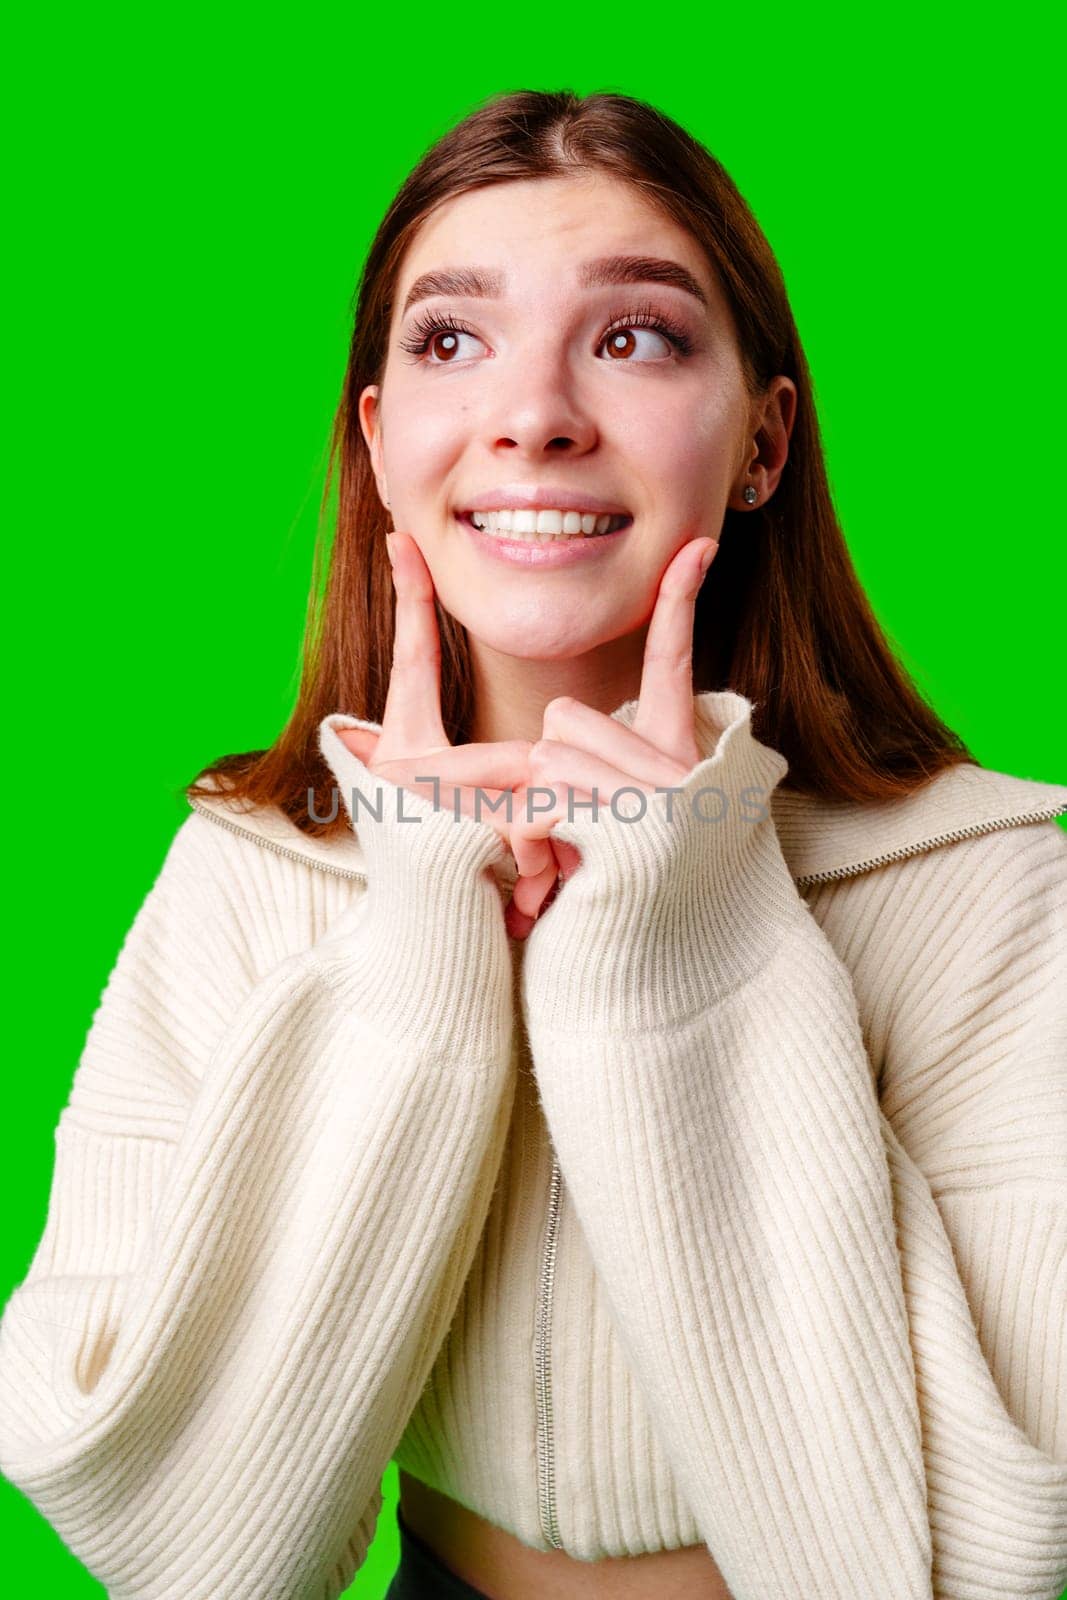 Smiling Young Woman Posing in Casual Clothing Against a Green Background by Fabrikasimf